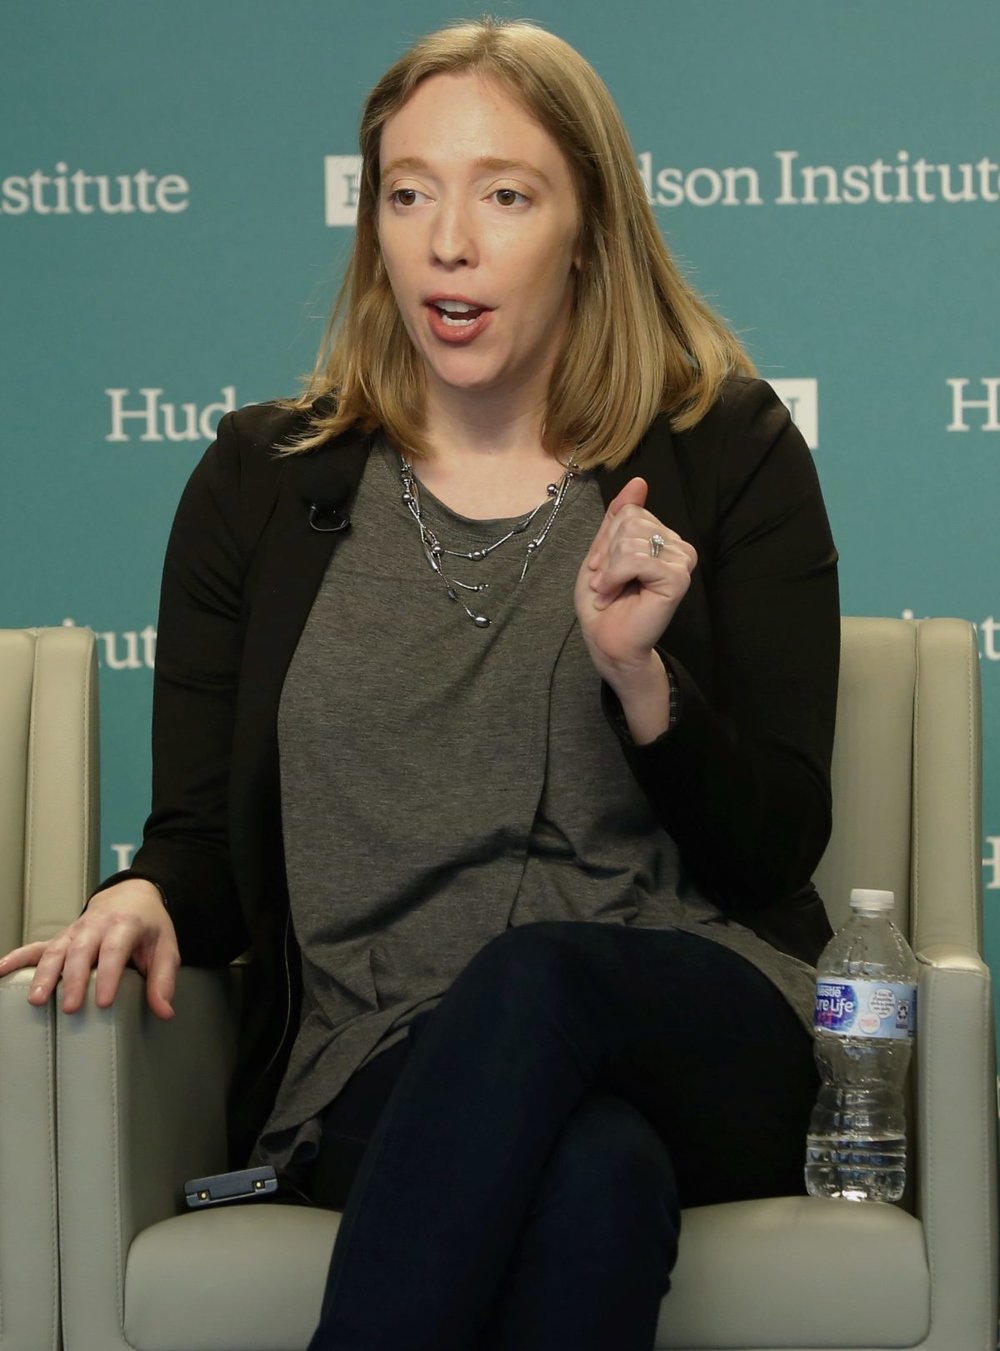  Bethany Allen-Ebrahimian, a former security affairs reporter at The Daily Beast, speaking at the “Mark Palmer Forum: China’s Global Challenge to Democratic Freedom” at the Hudson Institute in Washington on Oct. 27, 2018. (York Du/NTD) 